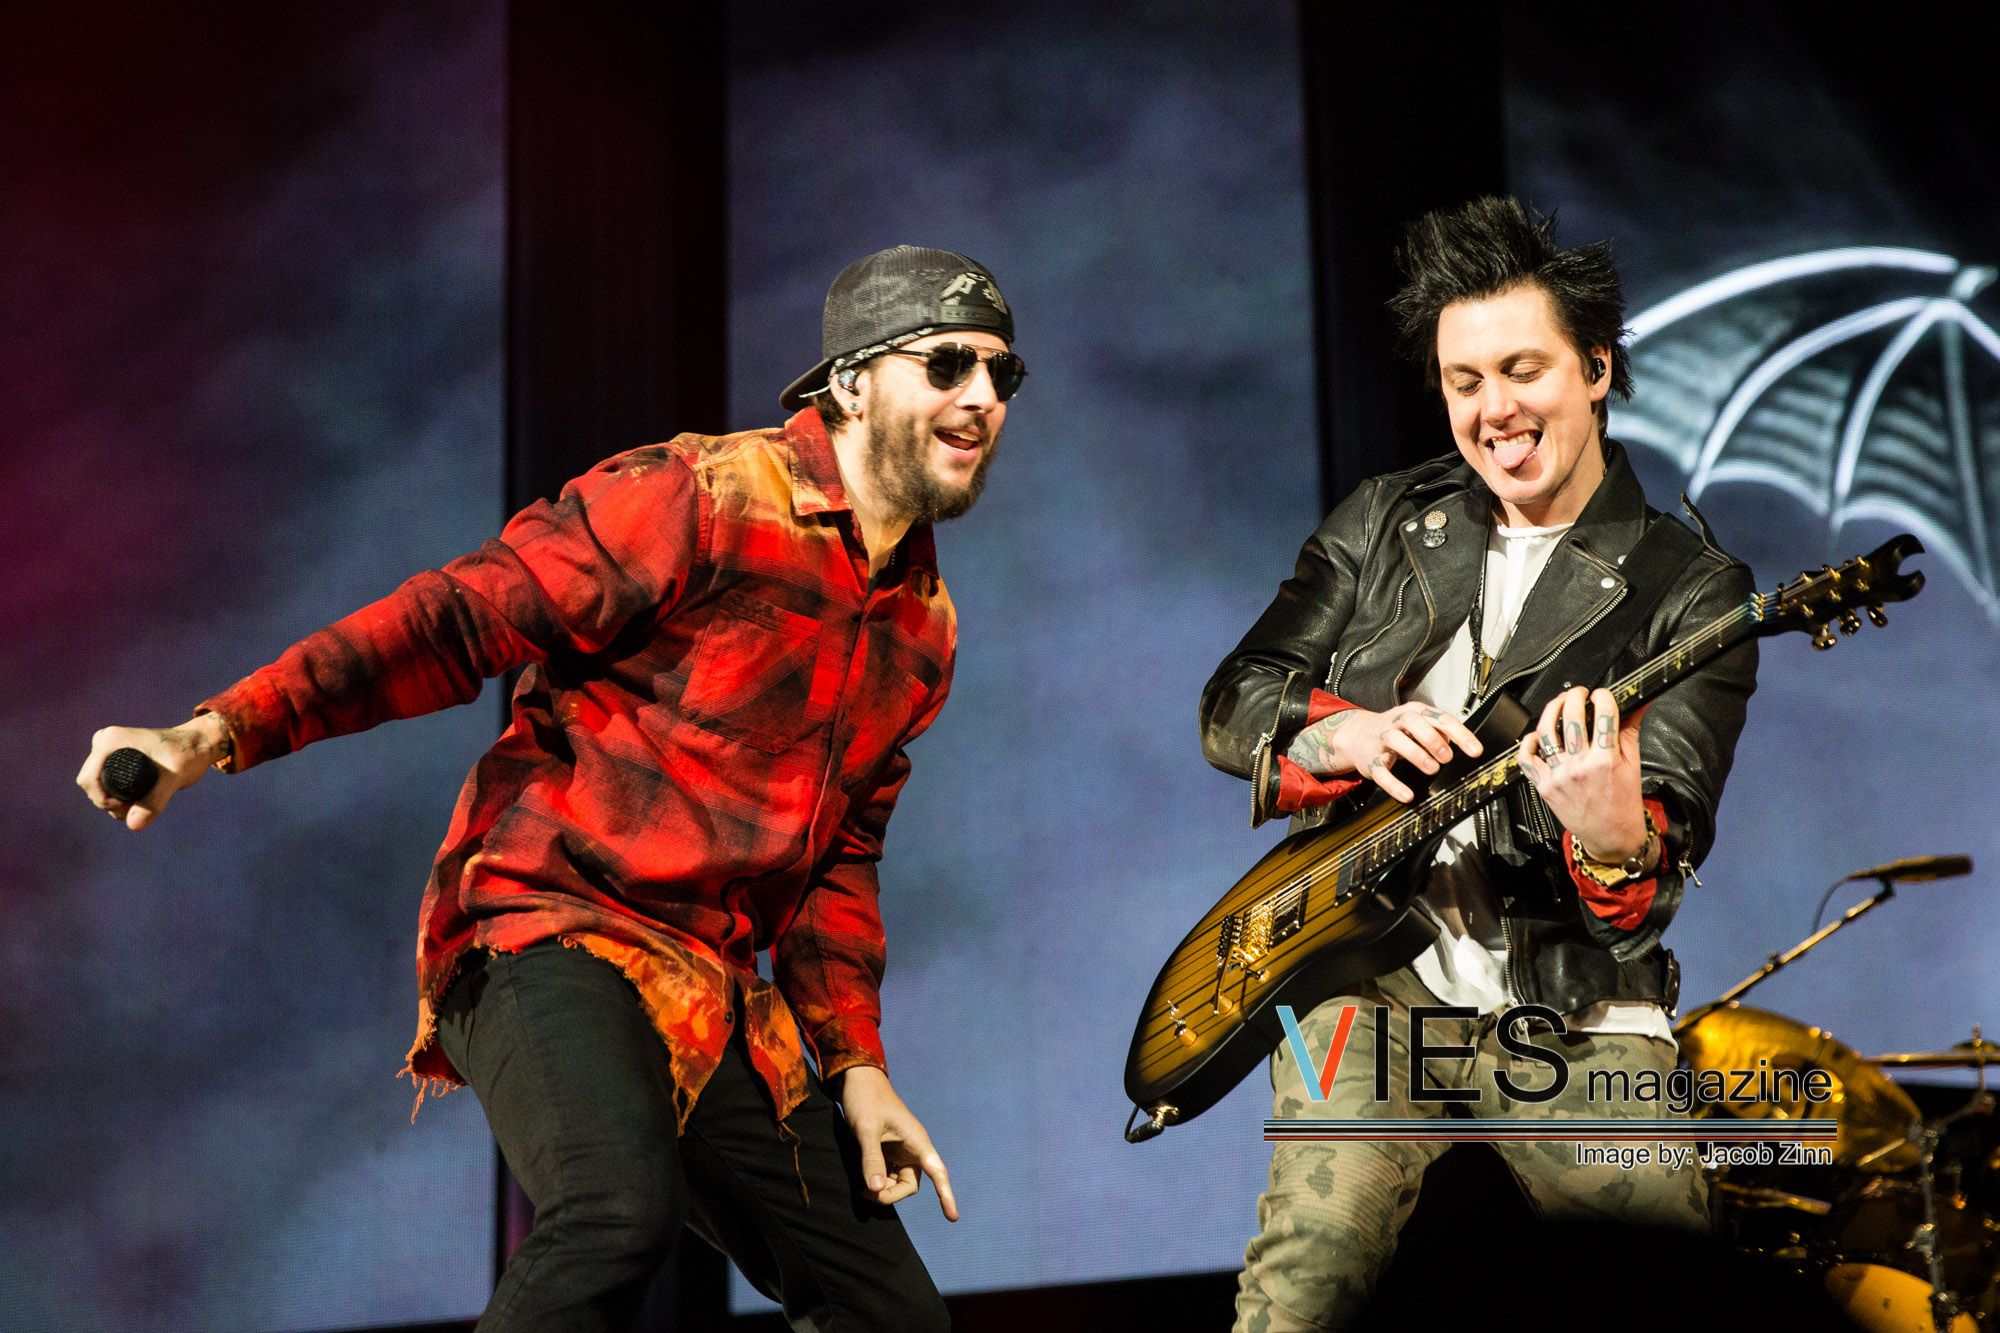 2000x1333 Avenged Sevenfold live in Vancouver | Avenged sevenfold, M shadows, Women in history